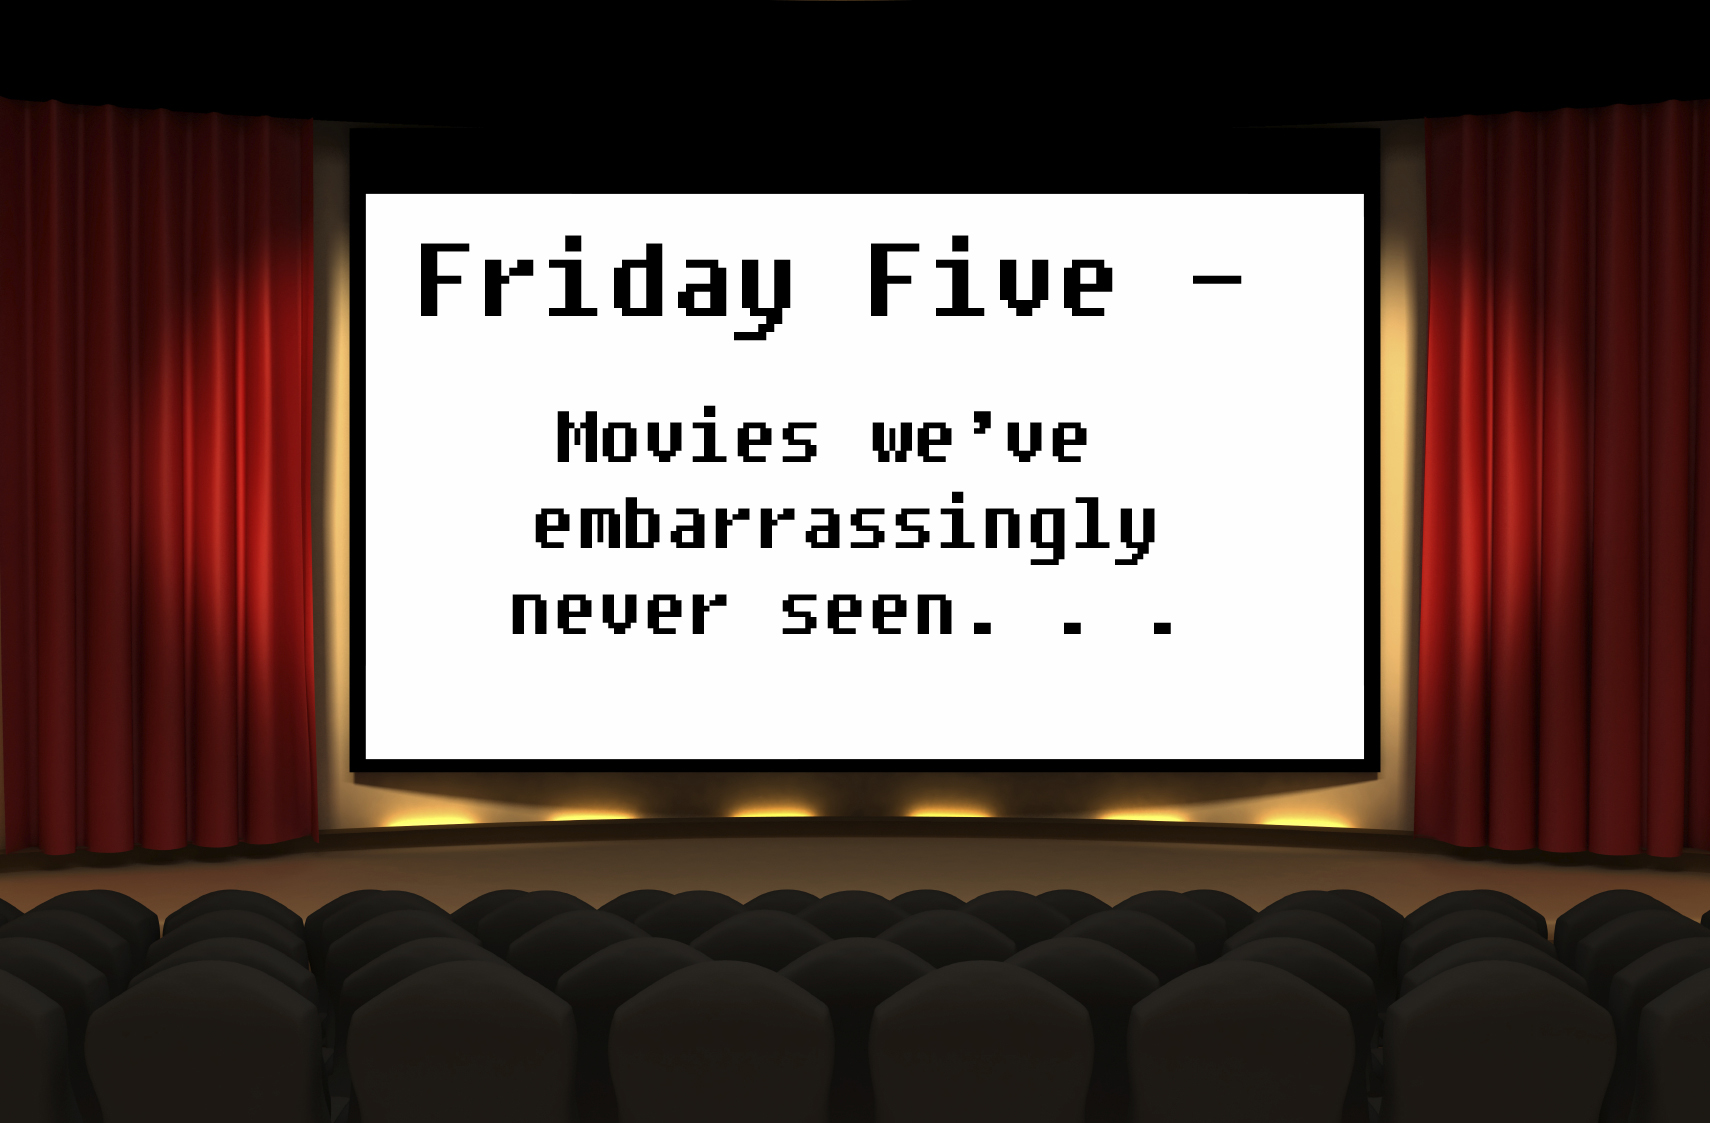 Friday Five - Movies we've embarrassingly never seen.